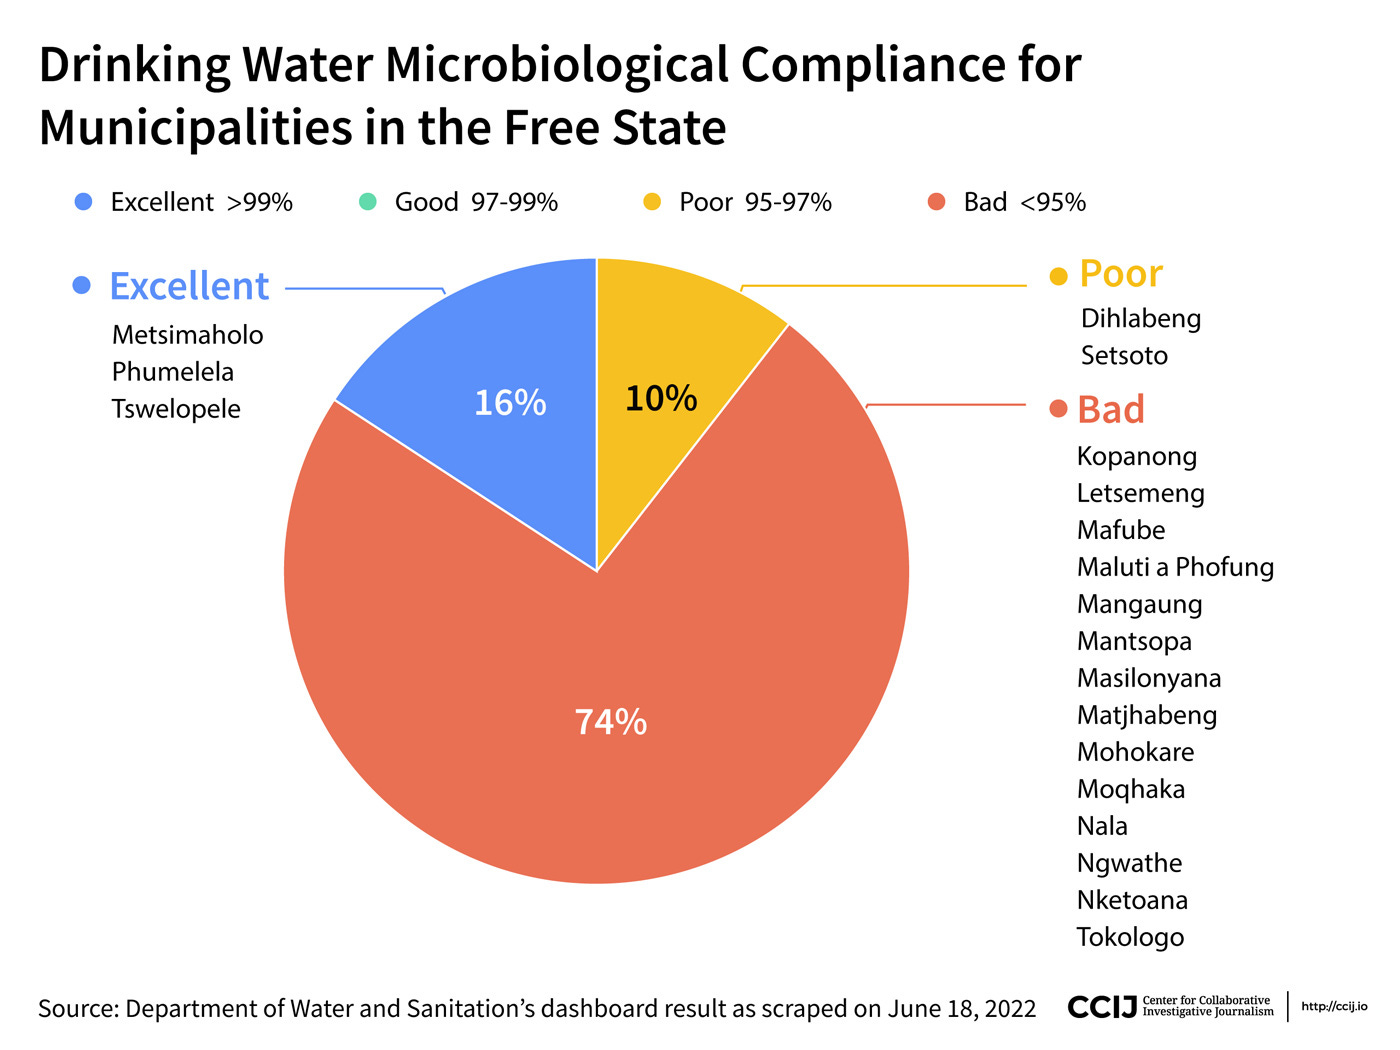 Drinking Water Microbiological Compliance for Municipalities in the Free State